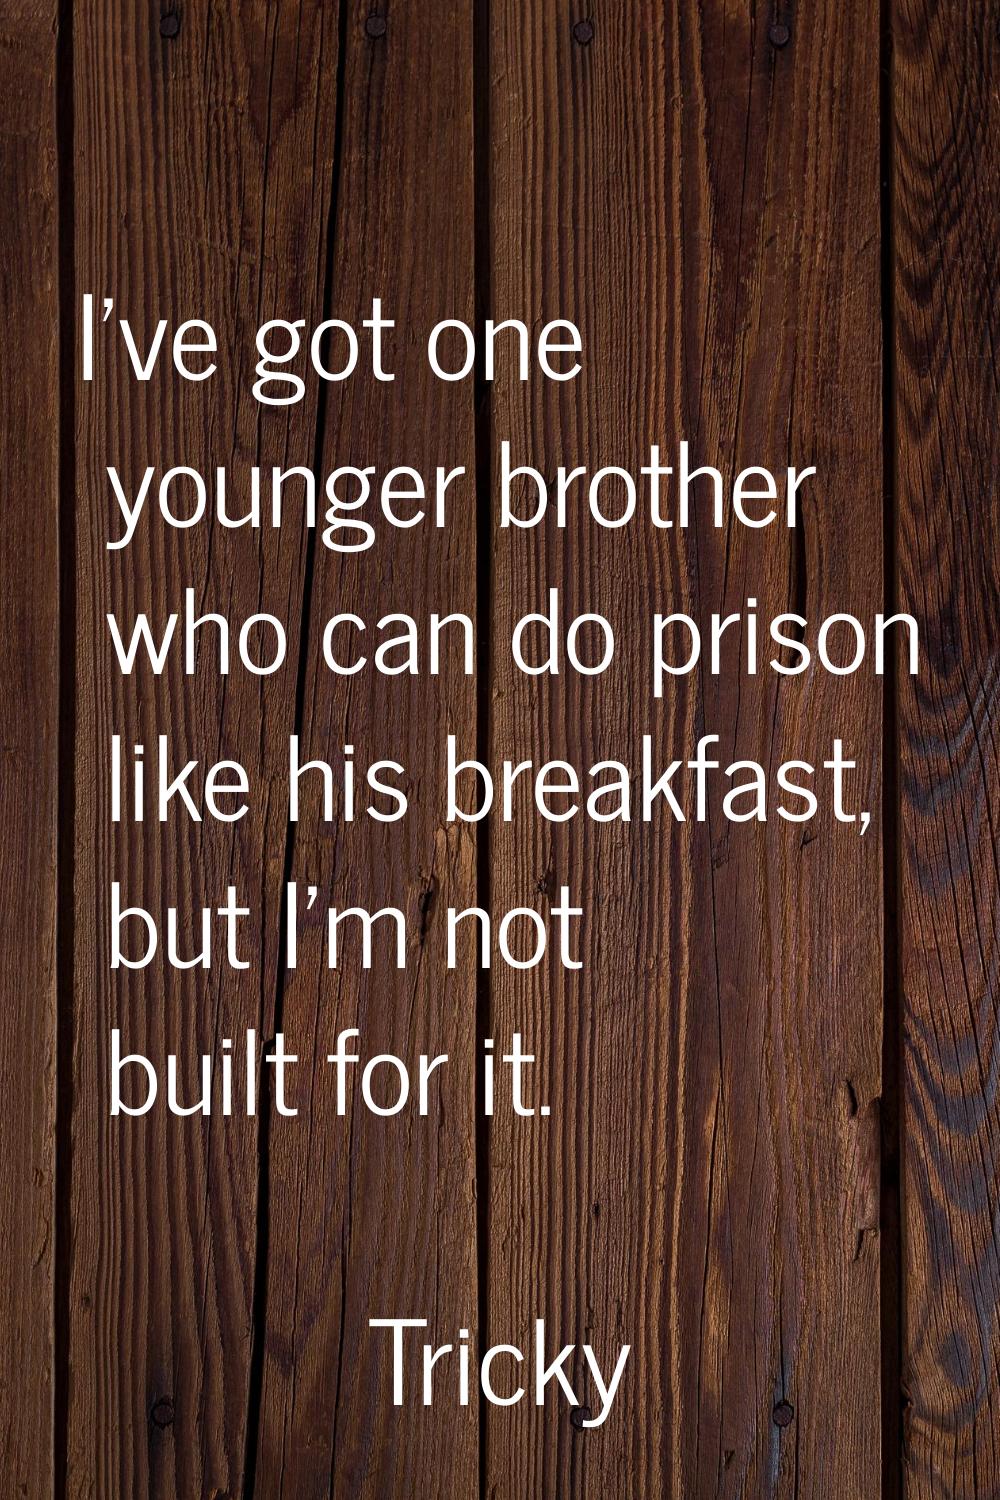 I've got one younger brother who can do prison like his breakfast, but I'm not built for it.